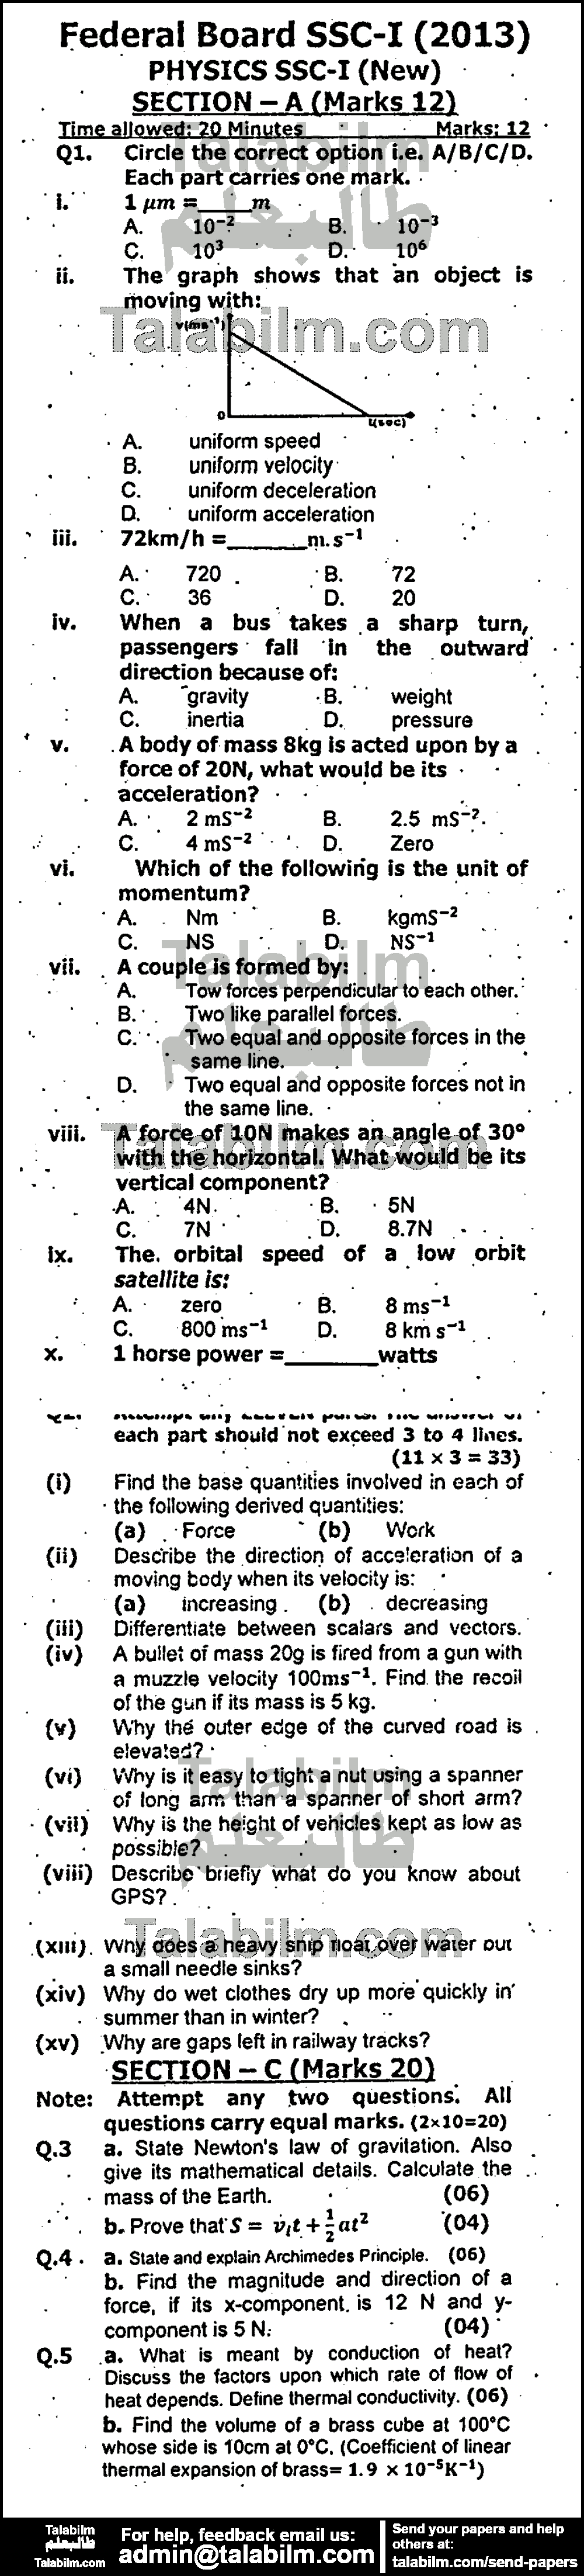 Physics 0 past paper for 2013 Group-I